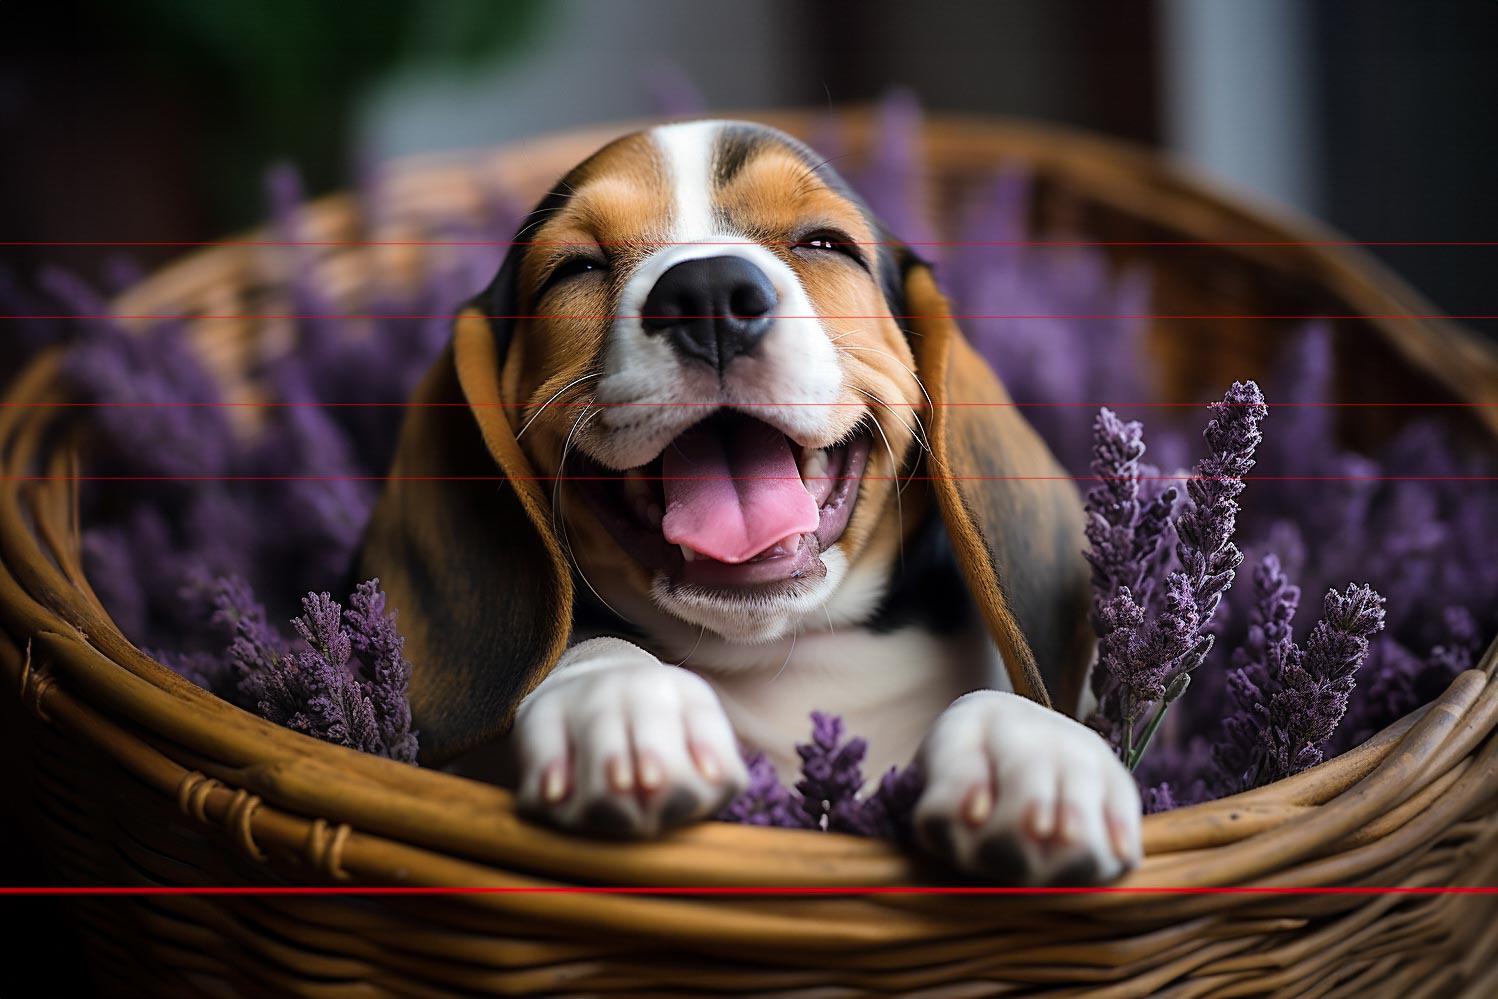 A picture of a joyful beagle puppy lying in a wicker basket filled with purple lavender flowers, smiling with its tongue out, eyes squinting in happiness, surrounded by lush greenery in the background.